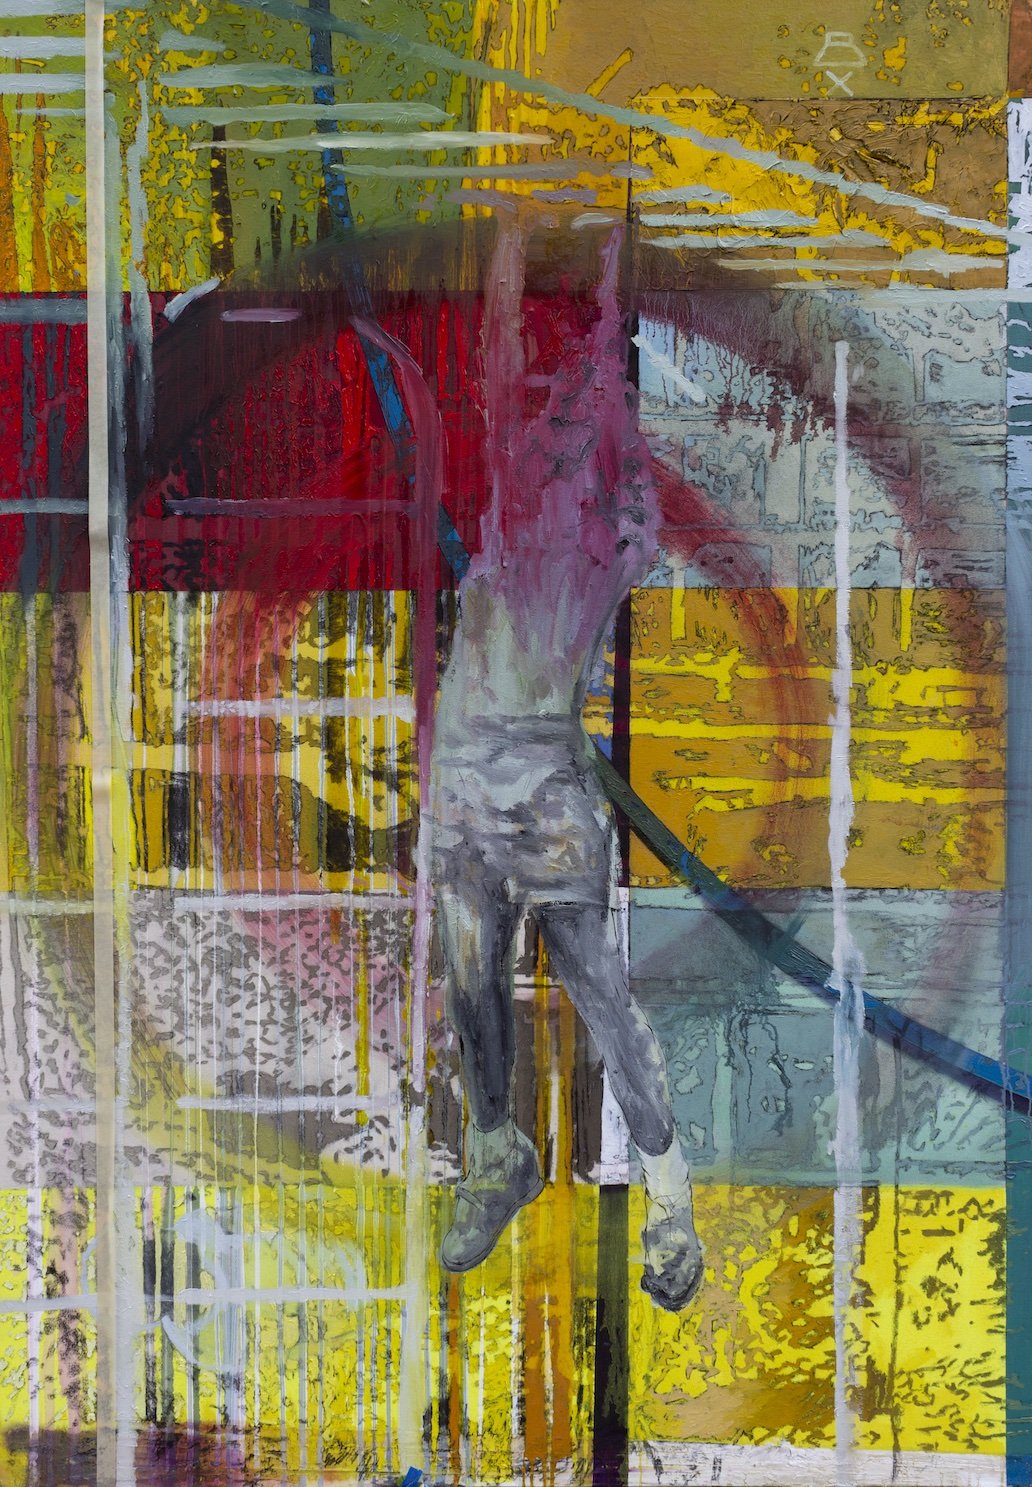    Climbing the Thread  , 70” x 43” oil, acrylic, makeup, resin, charcoal, graphite, enamel and masking tape on canvas 